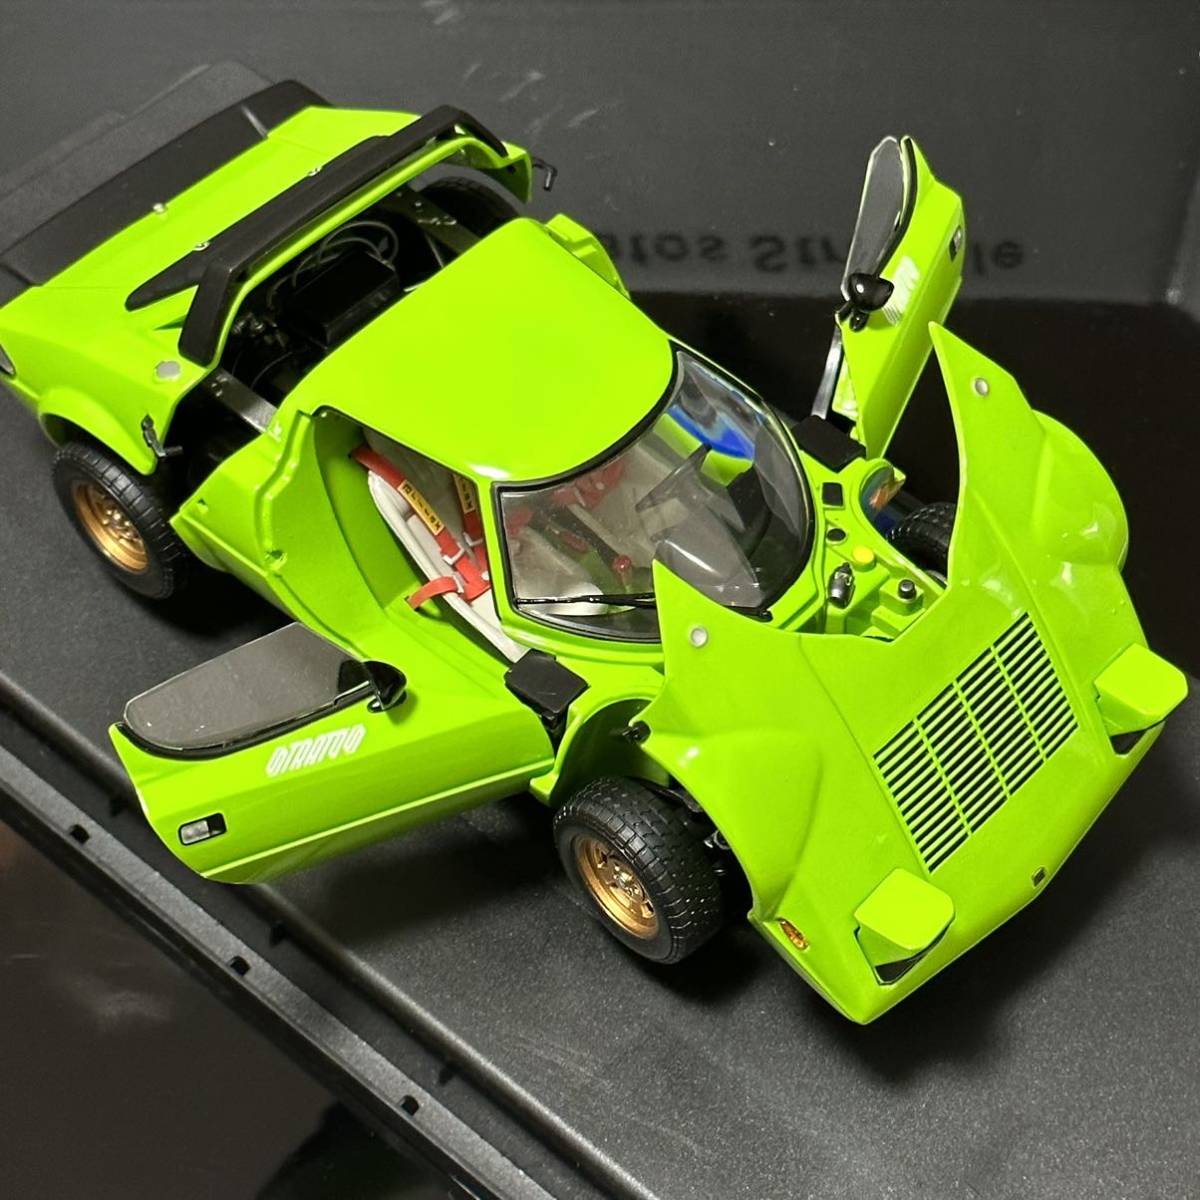 1/18 Sunstar Lancia Stratos Stradale out box attaching defect equipped minicar box attaching sun star lancia stratos stradale HF rally Rally 